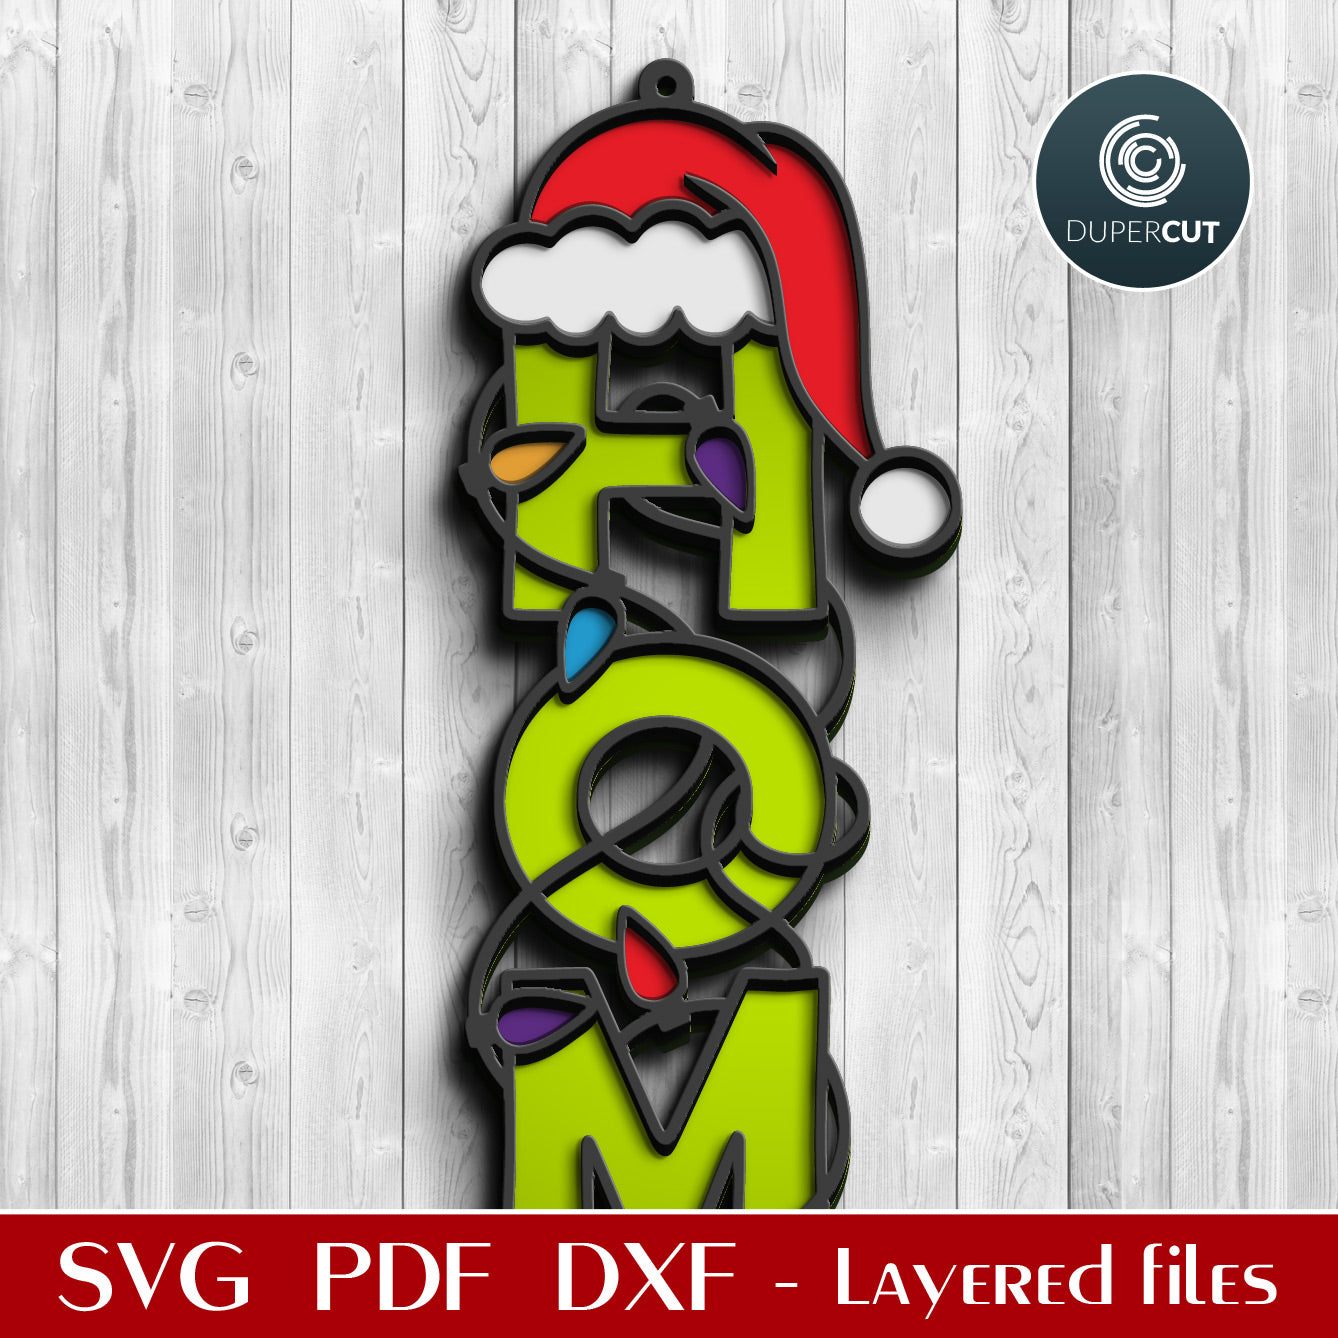 HOME holiday sign door hanger - SVG DXF layered vector files for laser cutting with Glowforge, Cricut, Silhouette, CNC plasma by DuperCut